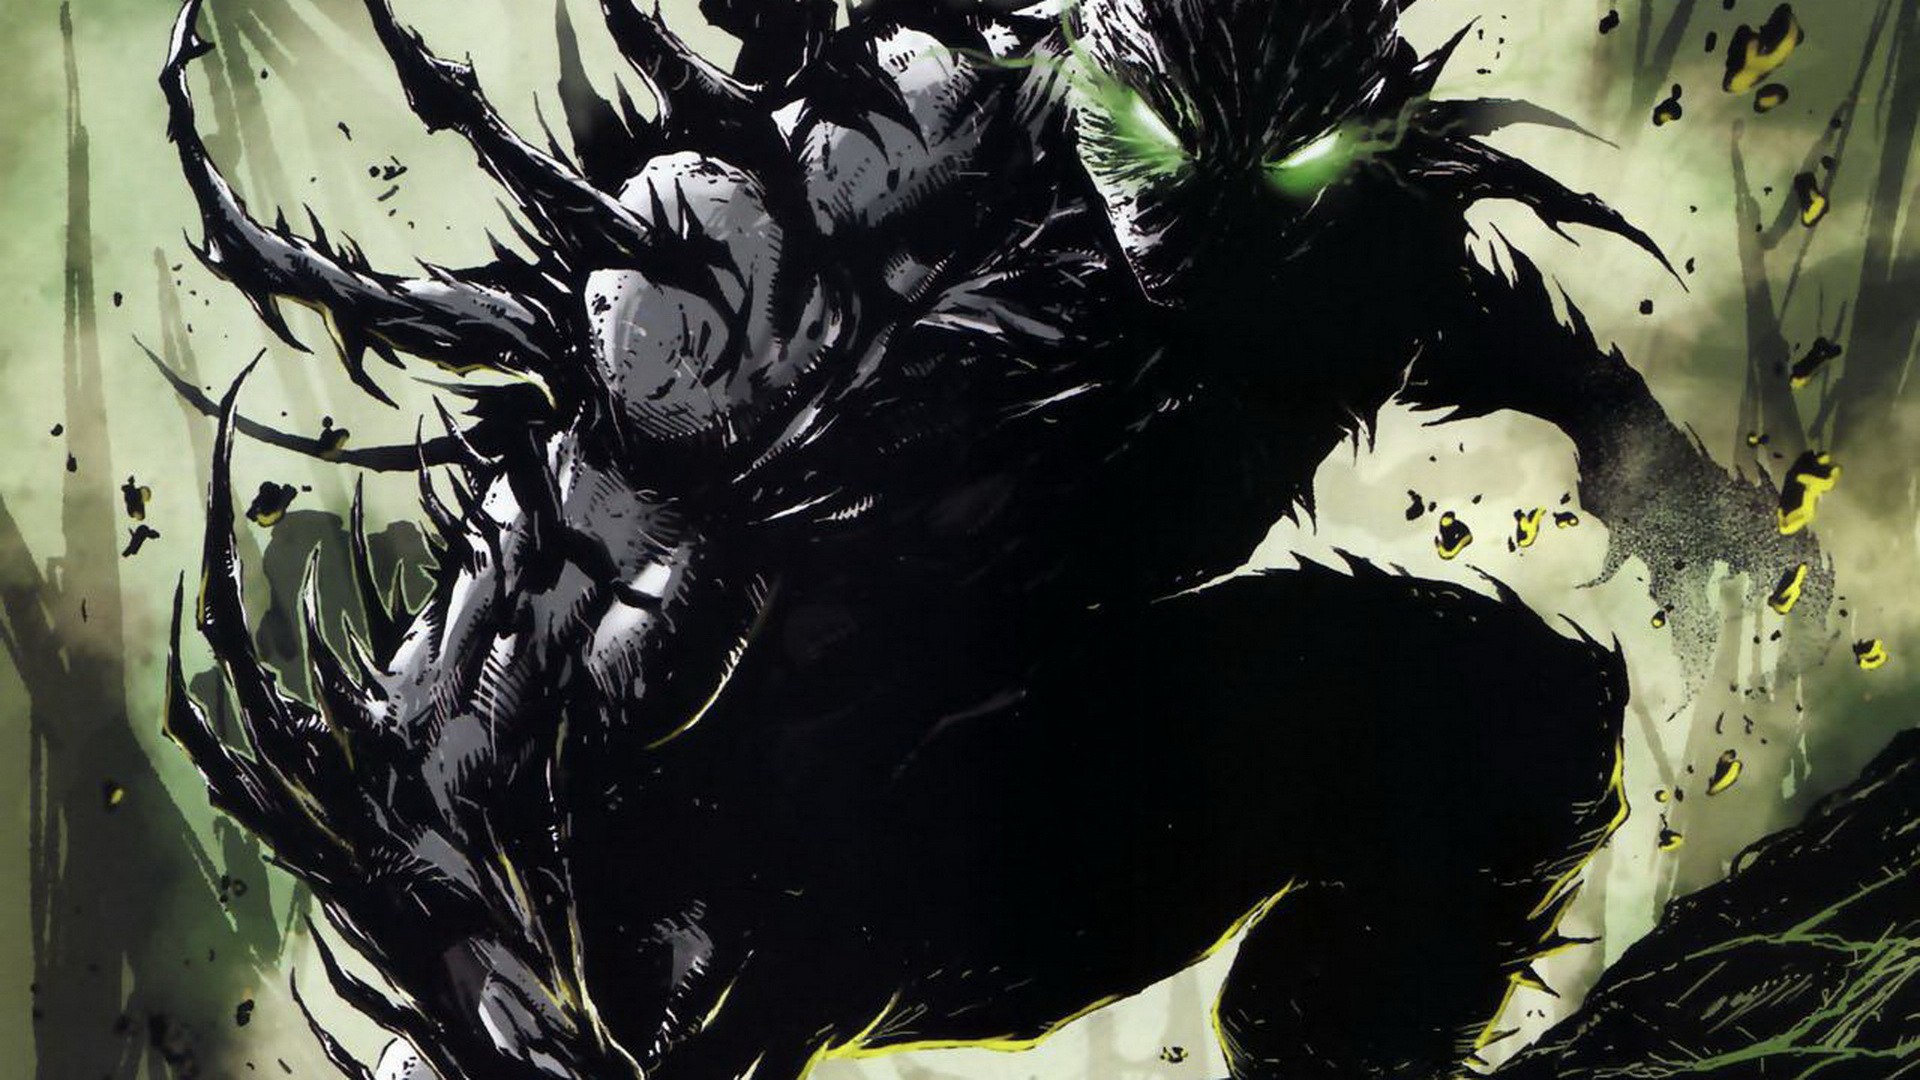 spawn hd wallpapers made par todd mcfarlane ready as background